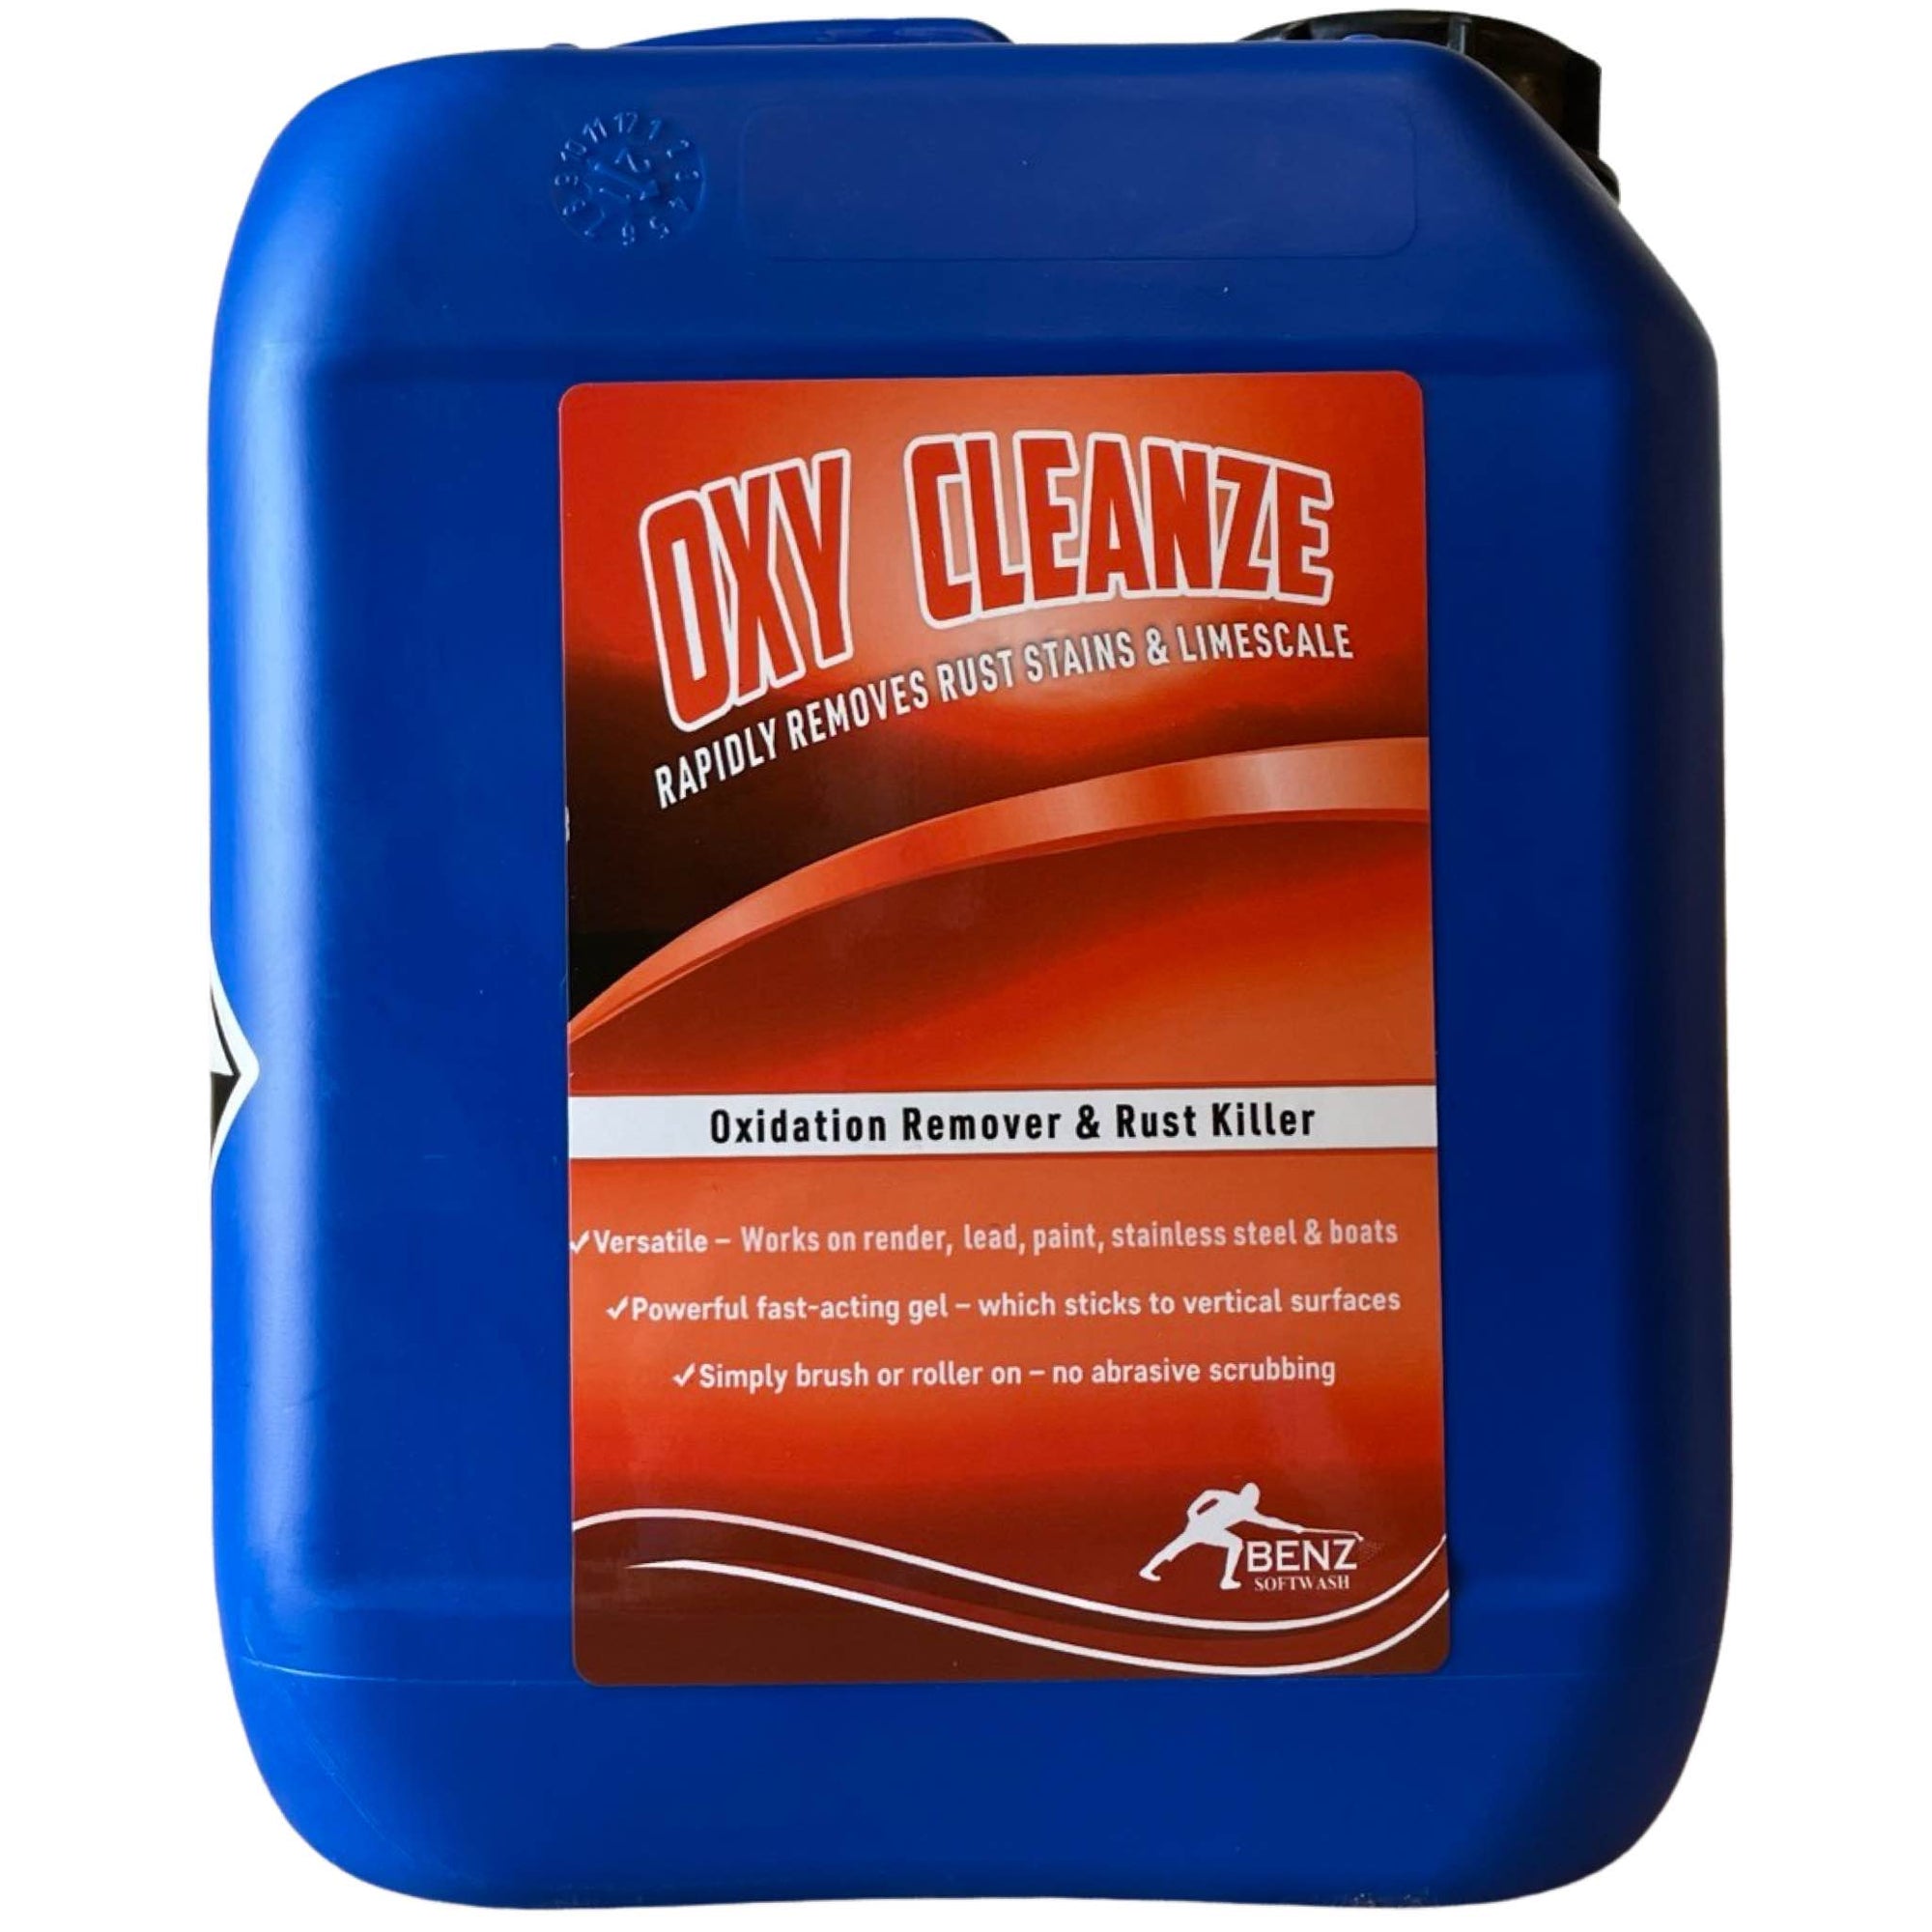 OXY CLEANZE – Thick gel: Kills rust, dissolves limescale, removes rust stains from most surfaces (*see below)